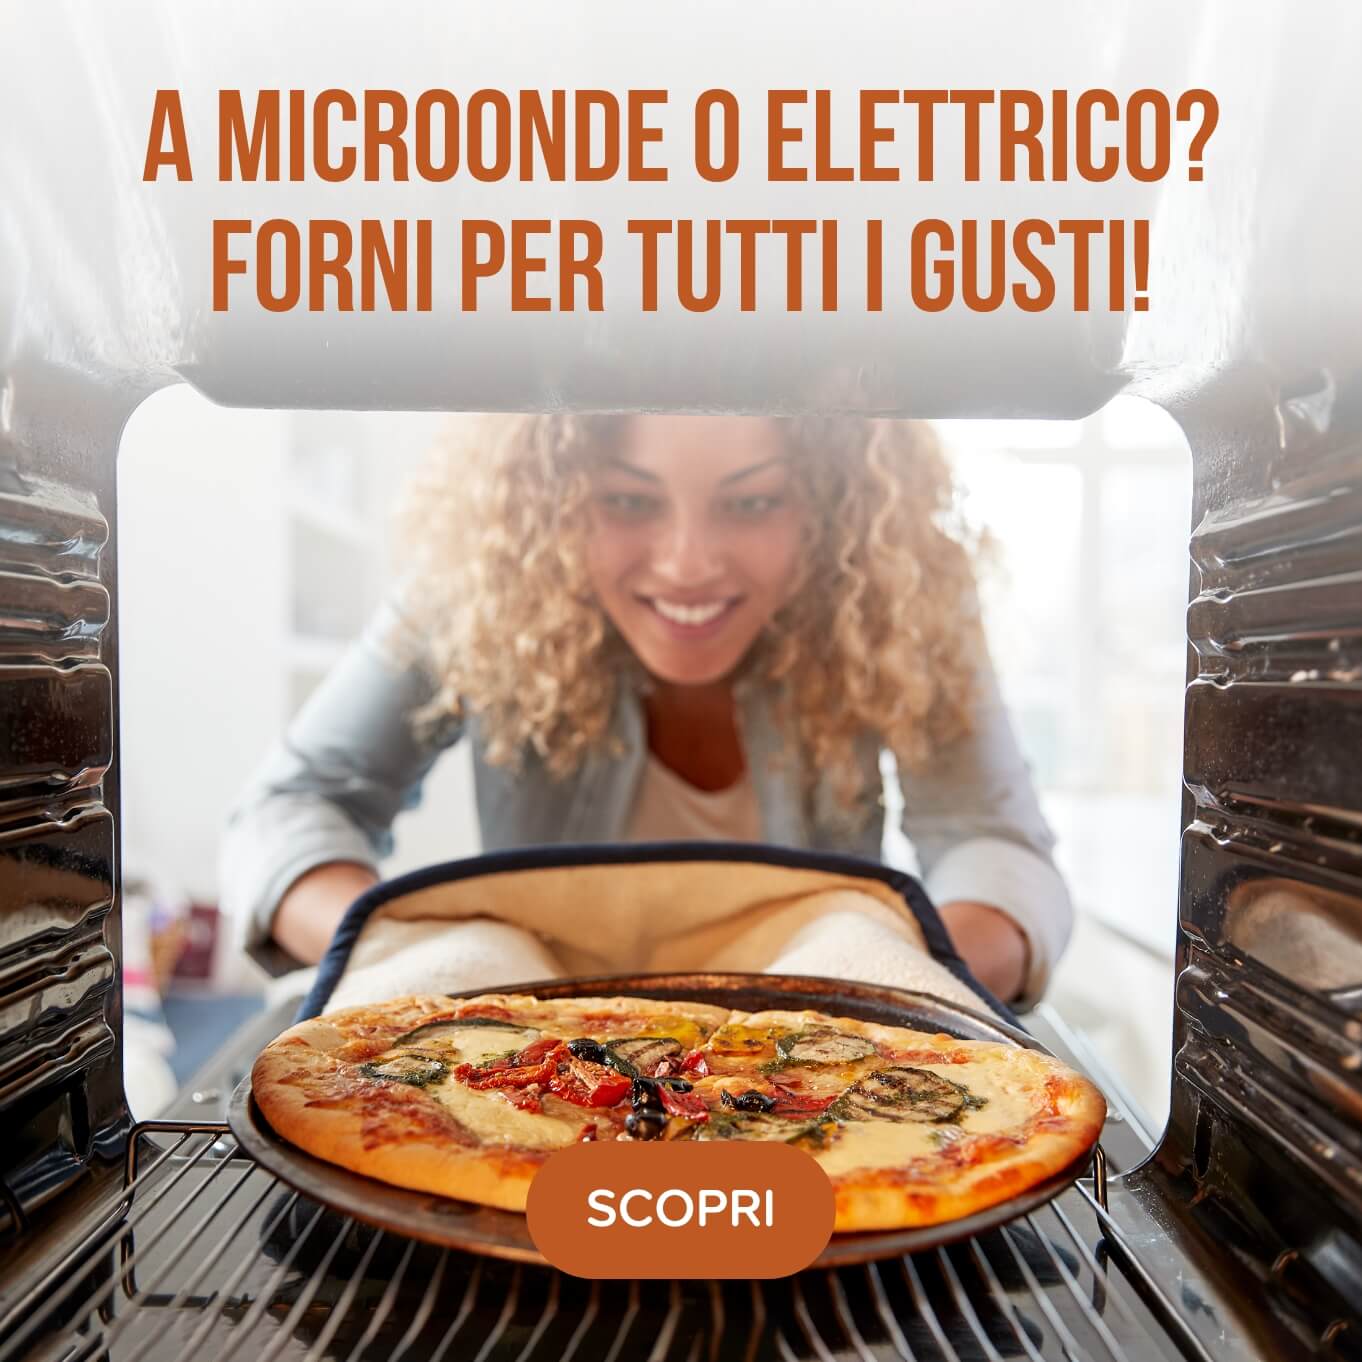 Forni a microonde